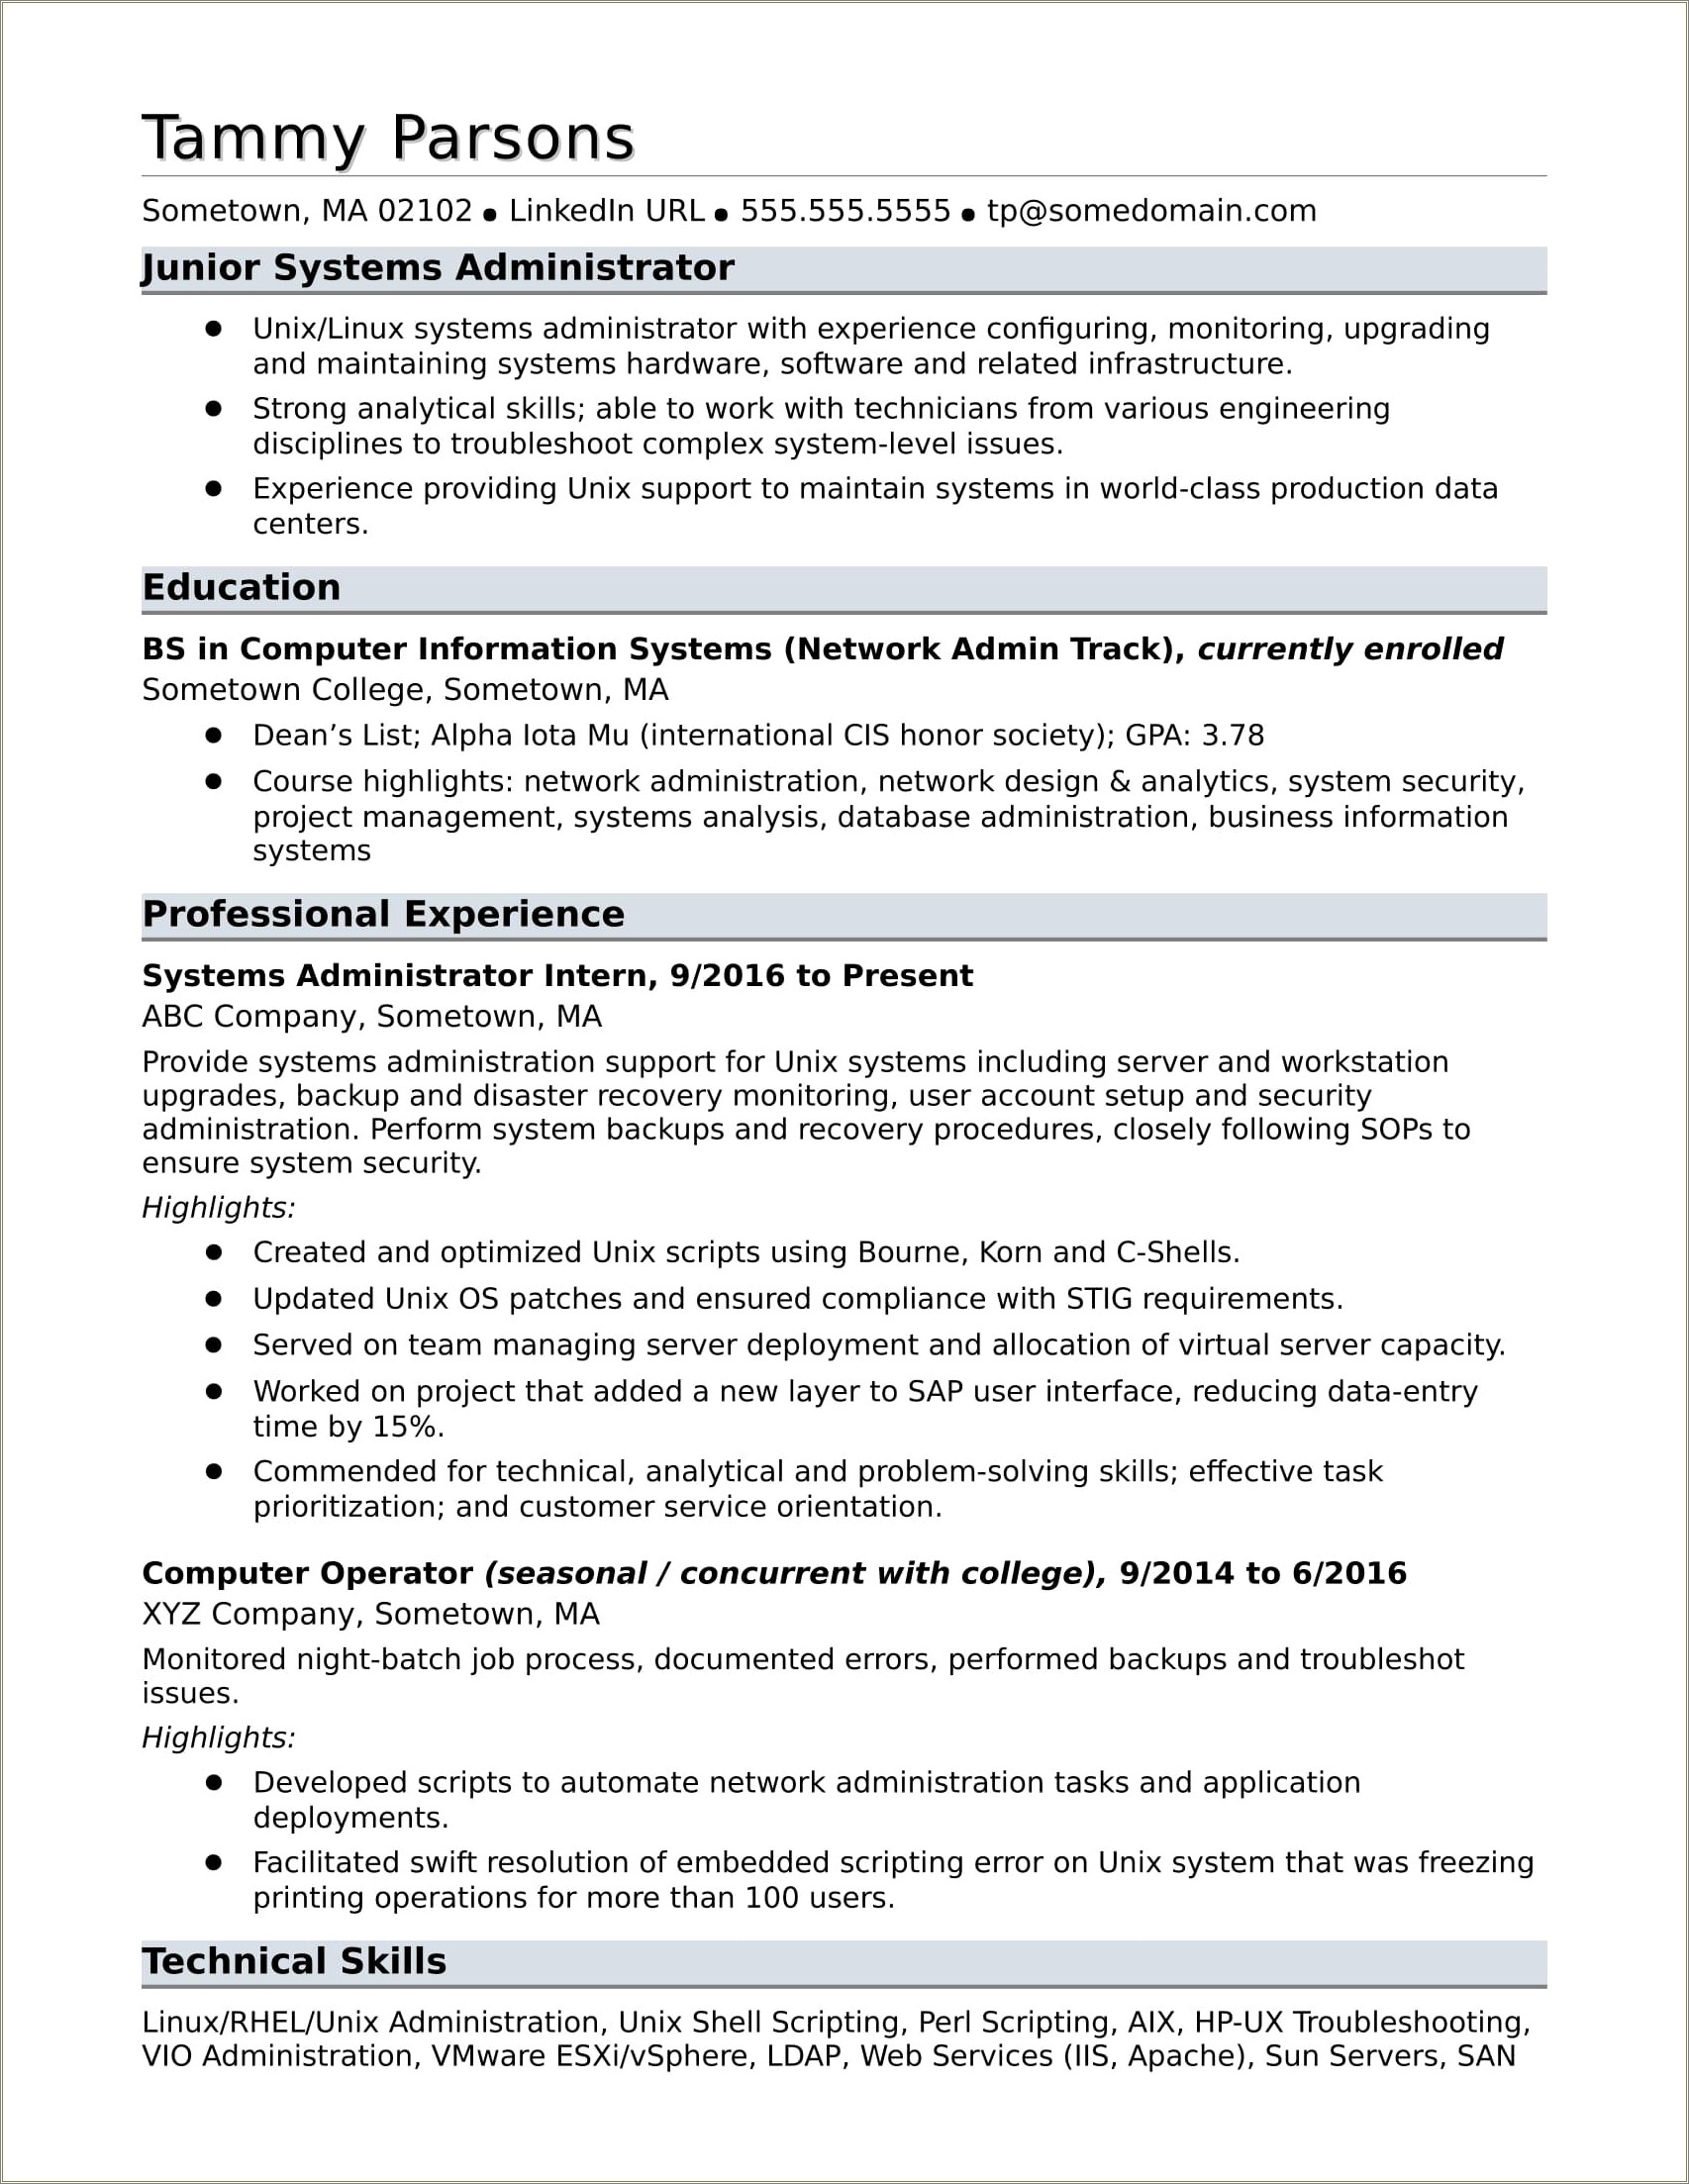 3 Years Experience Resume In System Administrator